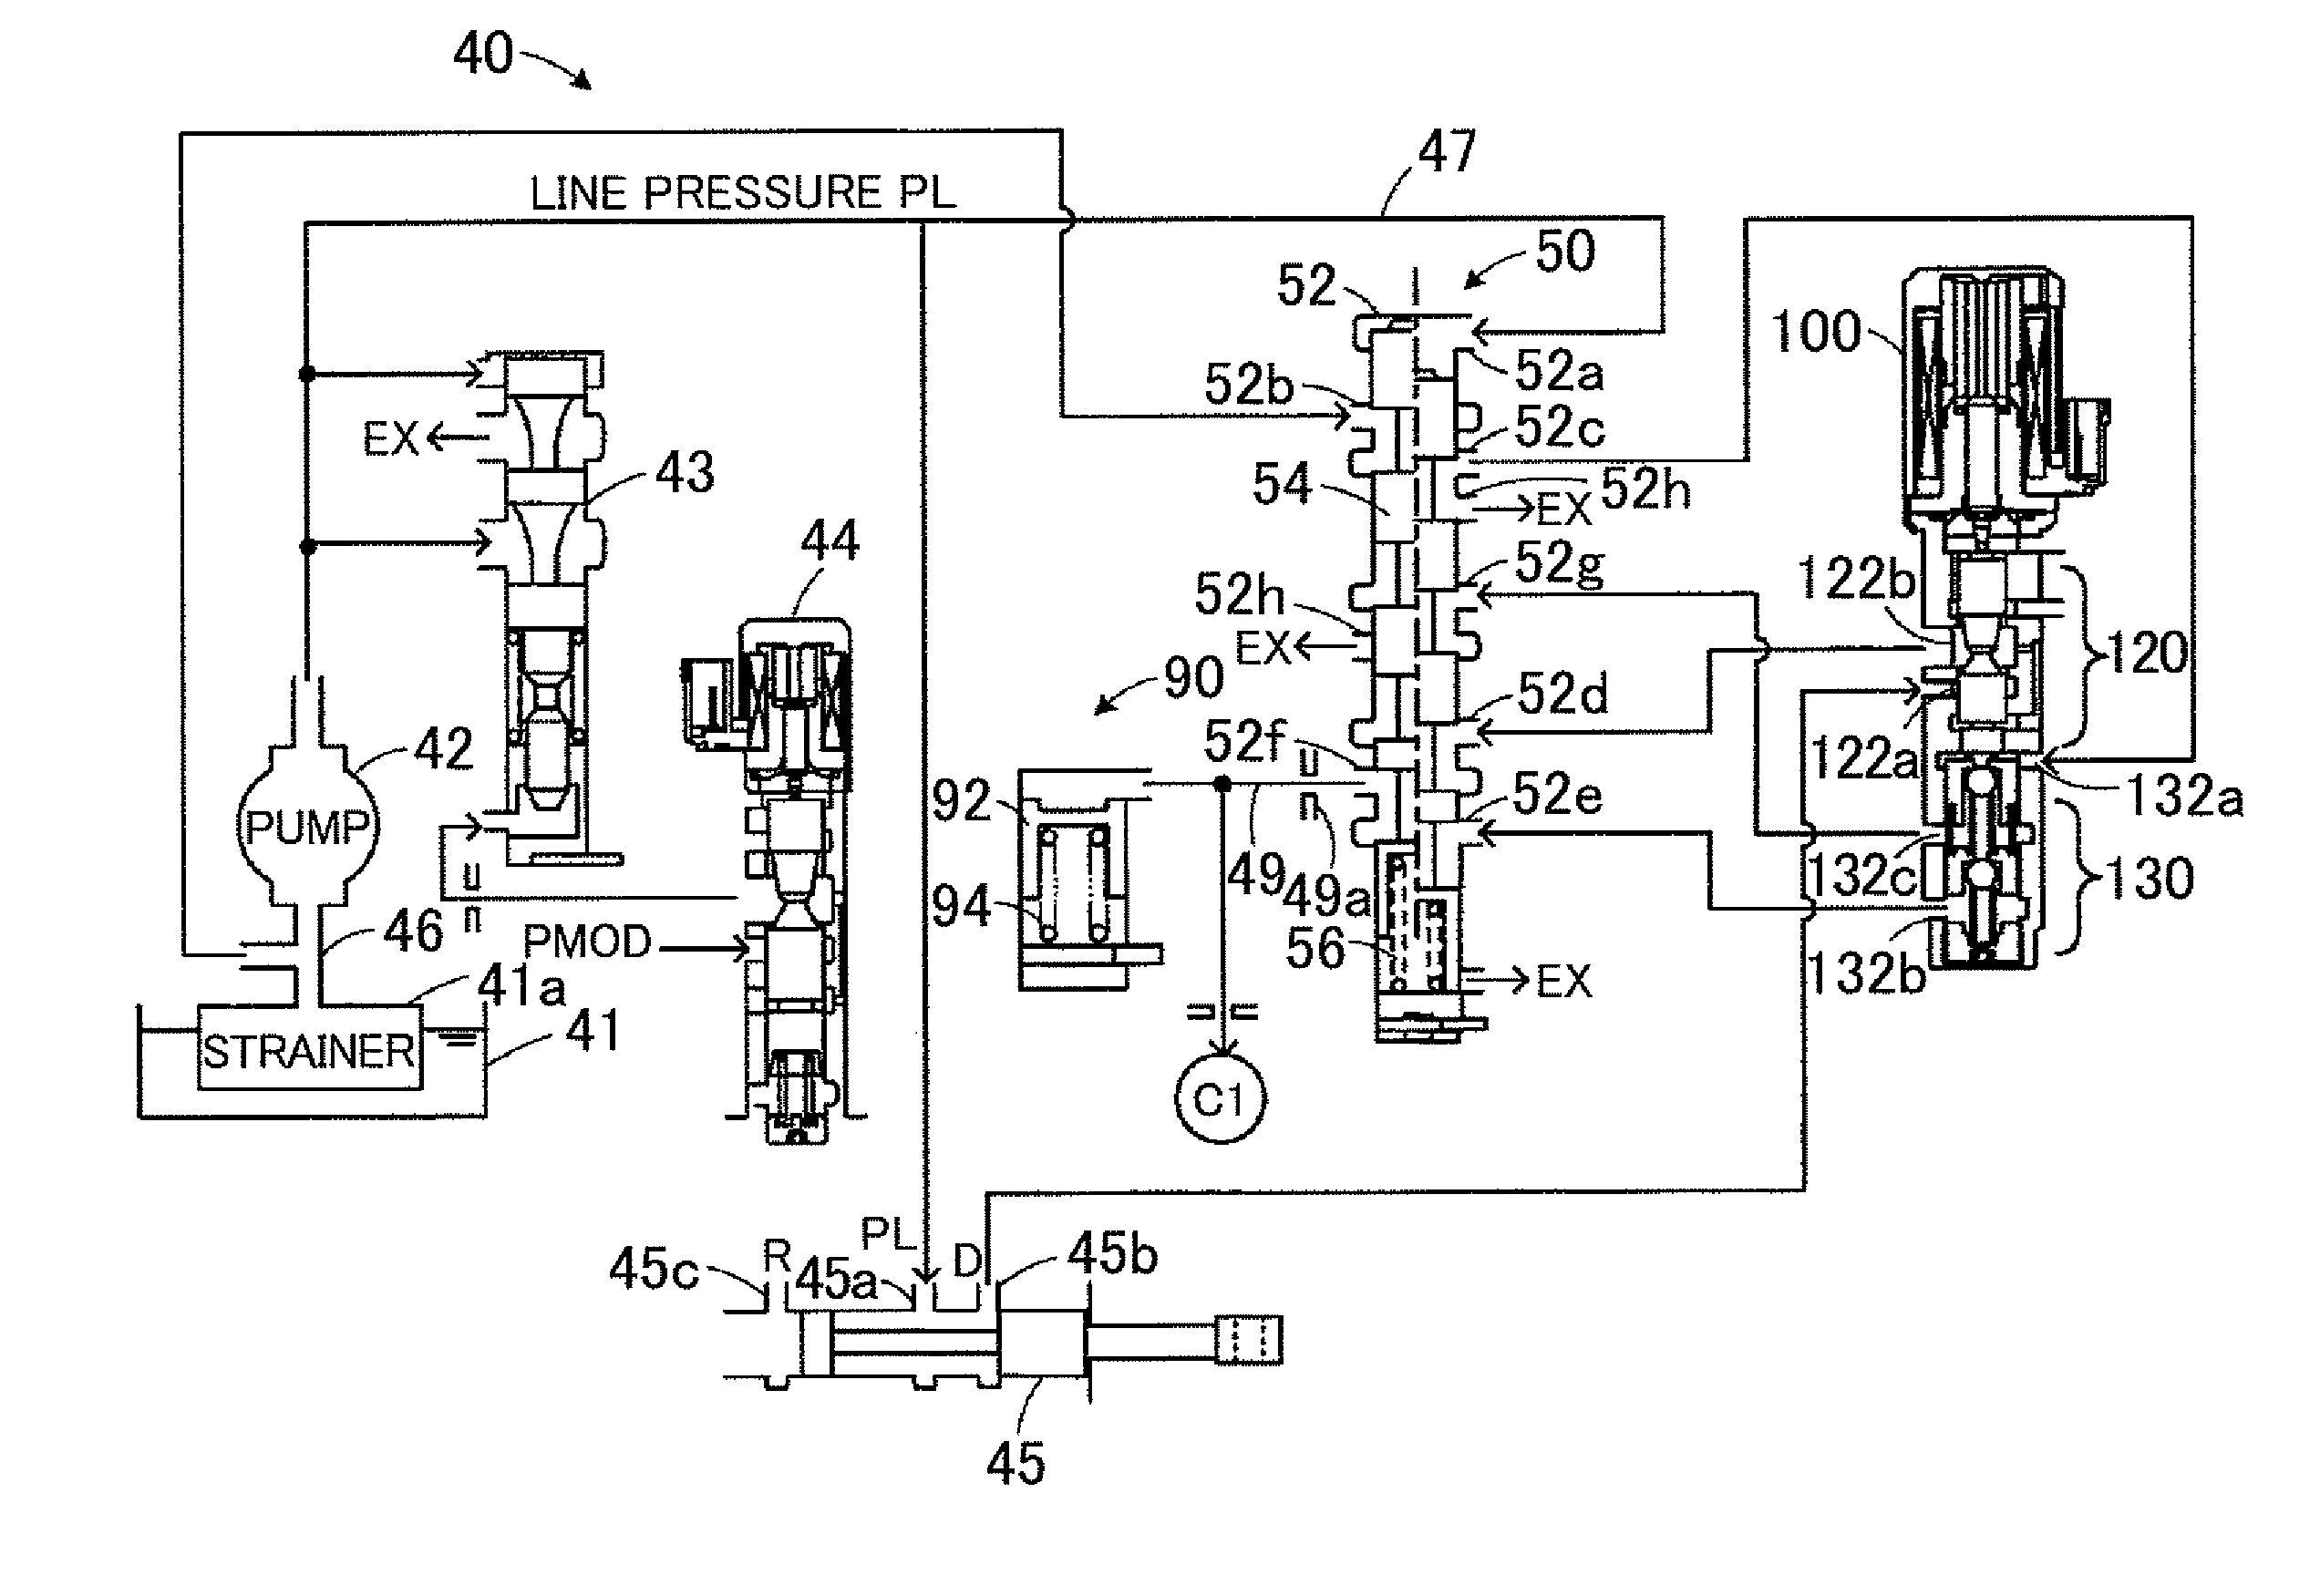 Power transmitting device and vehicle having same mounted thereon